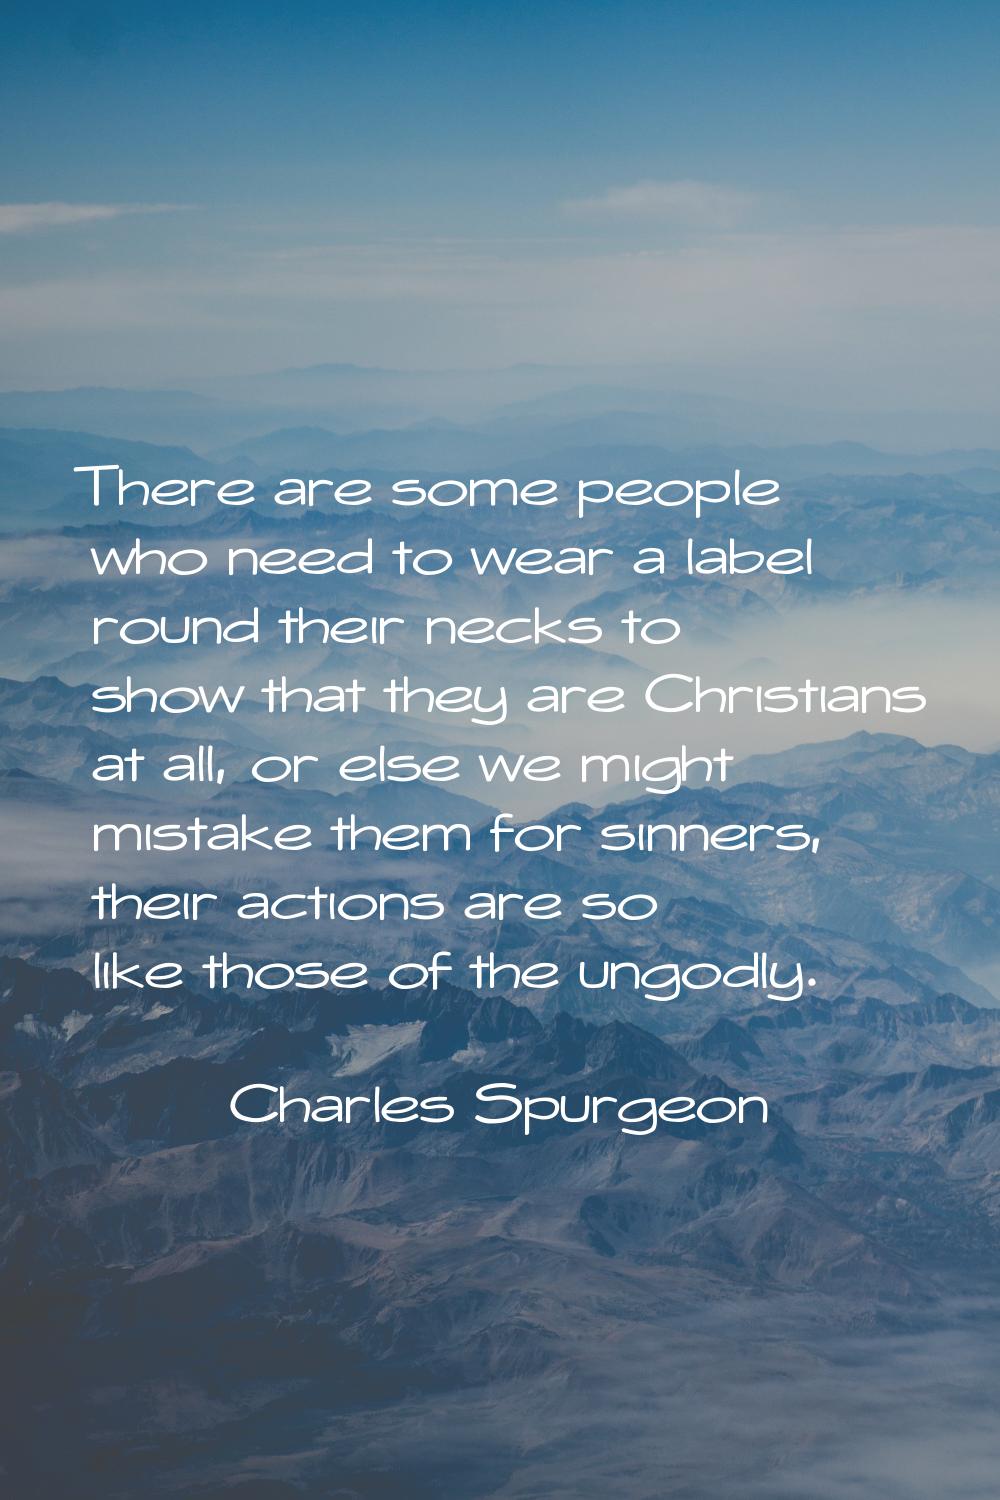 There are some people who need to wear a label round their necks to show that they are Christians a